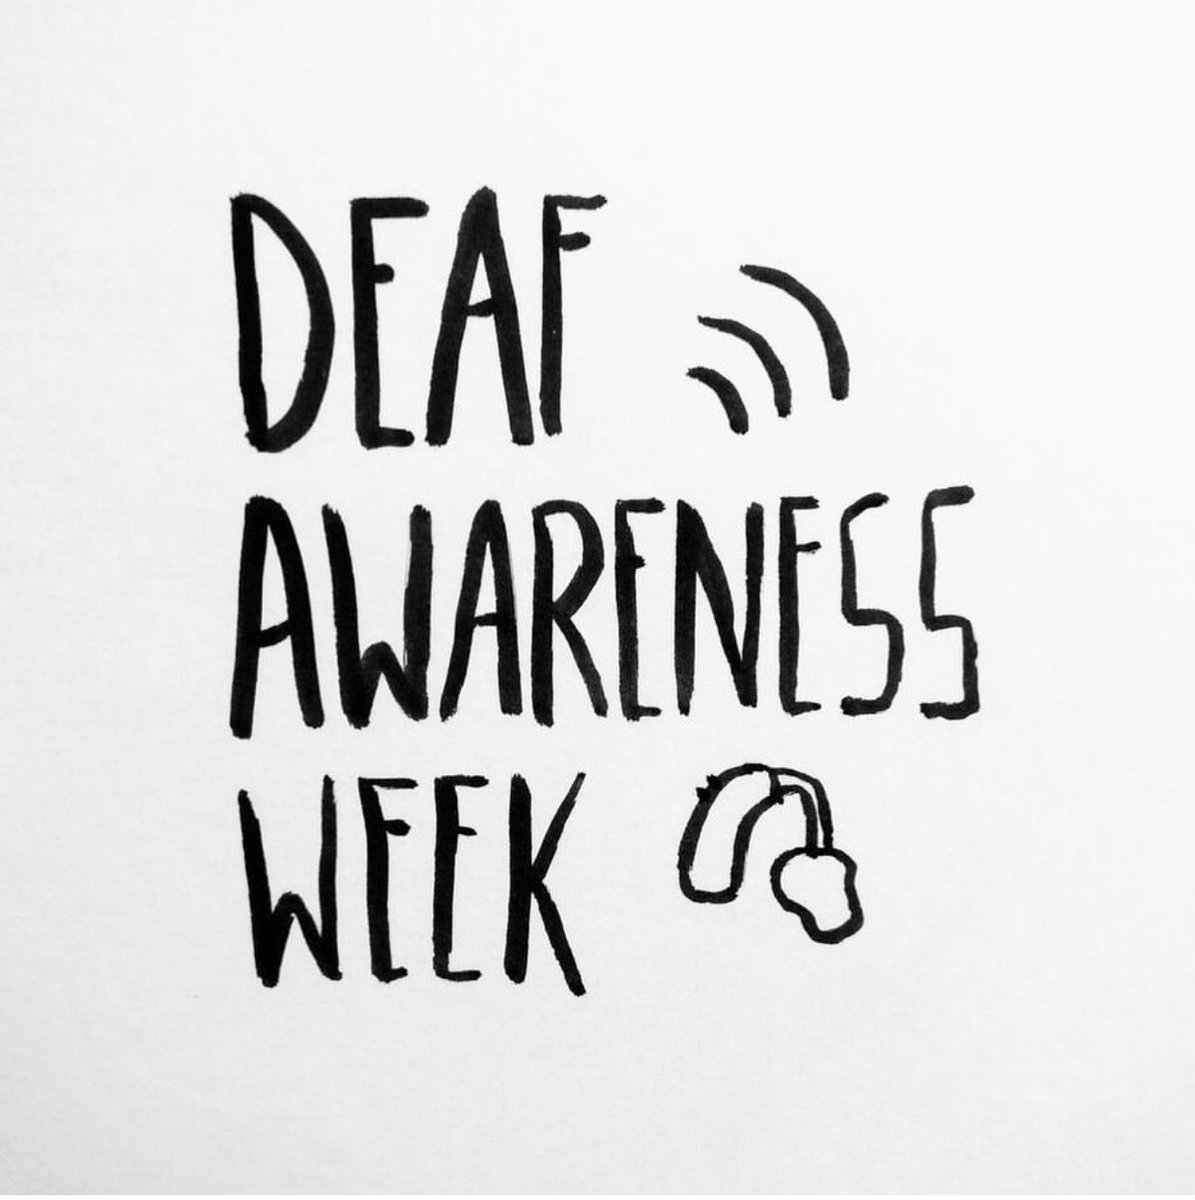 With hearing aids, doesn’t meant a Deaf person can hear like a hearing person #BeDeafAware #learnBSL #DeafAwarenessWeek #DeafAwarenessWeek2019